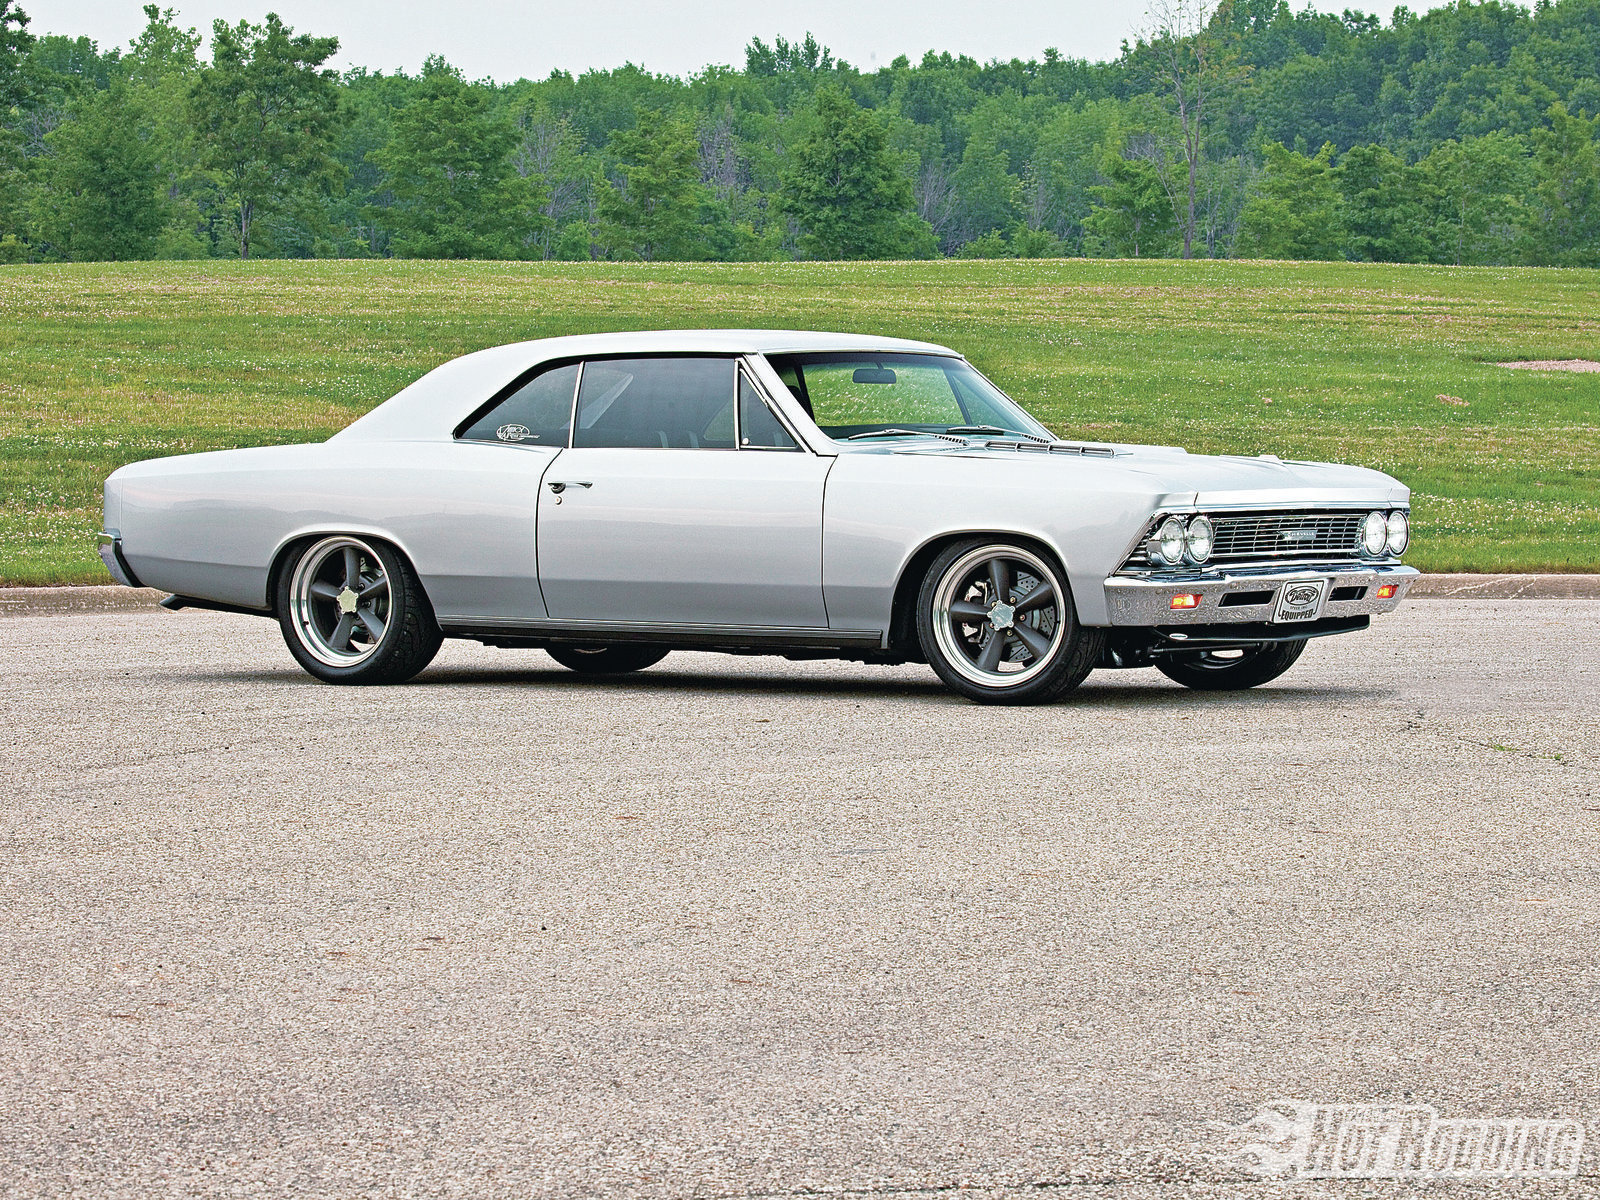 Chevelle Malibu Muscle Cars Hot Rods R Wallpaper Background